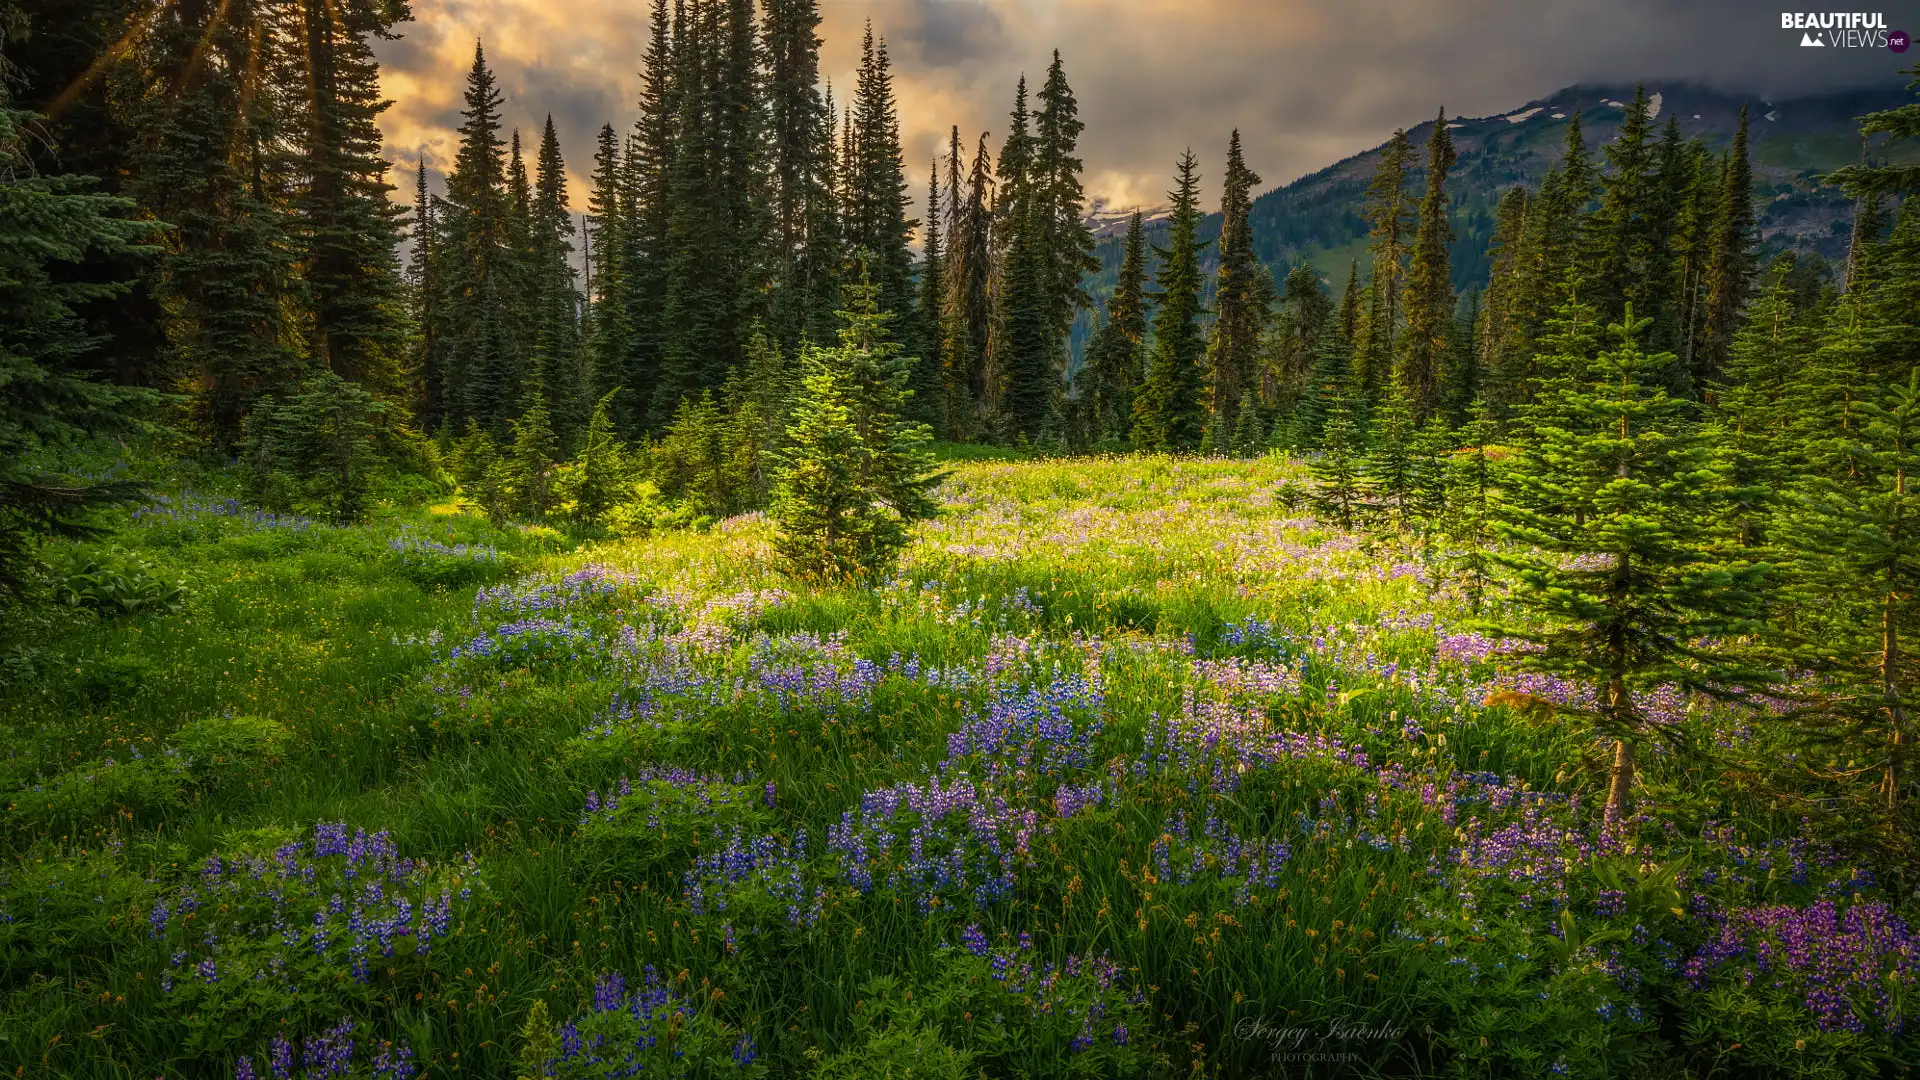 trees, viewes, The United States, Meadow, Washington State, Mountains, Mount Rainier National Park, Flowers